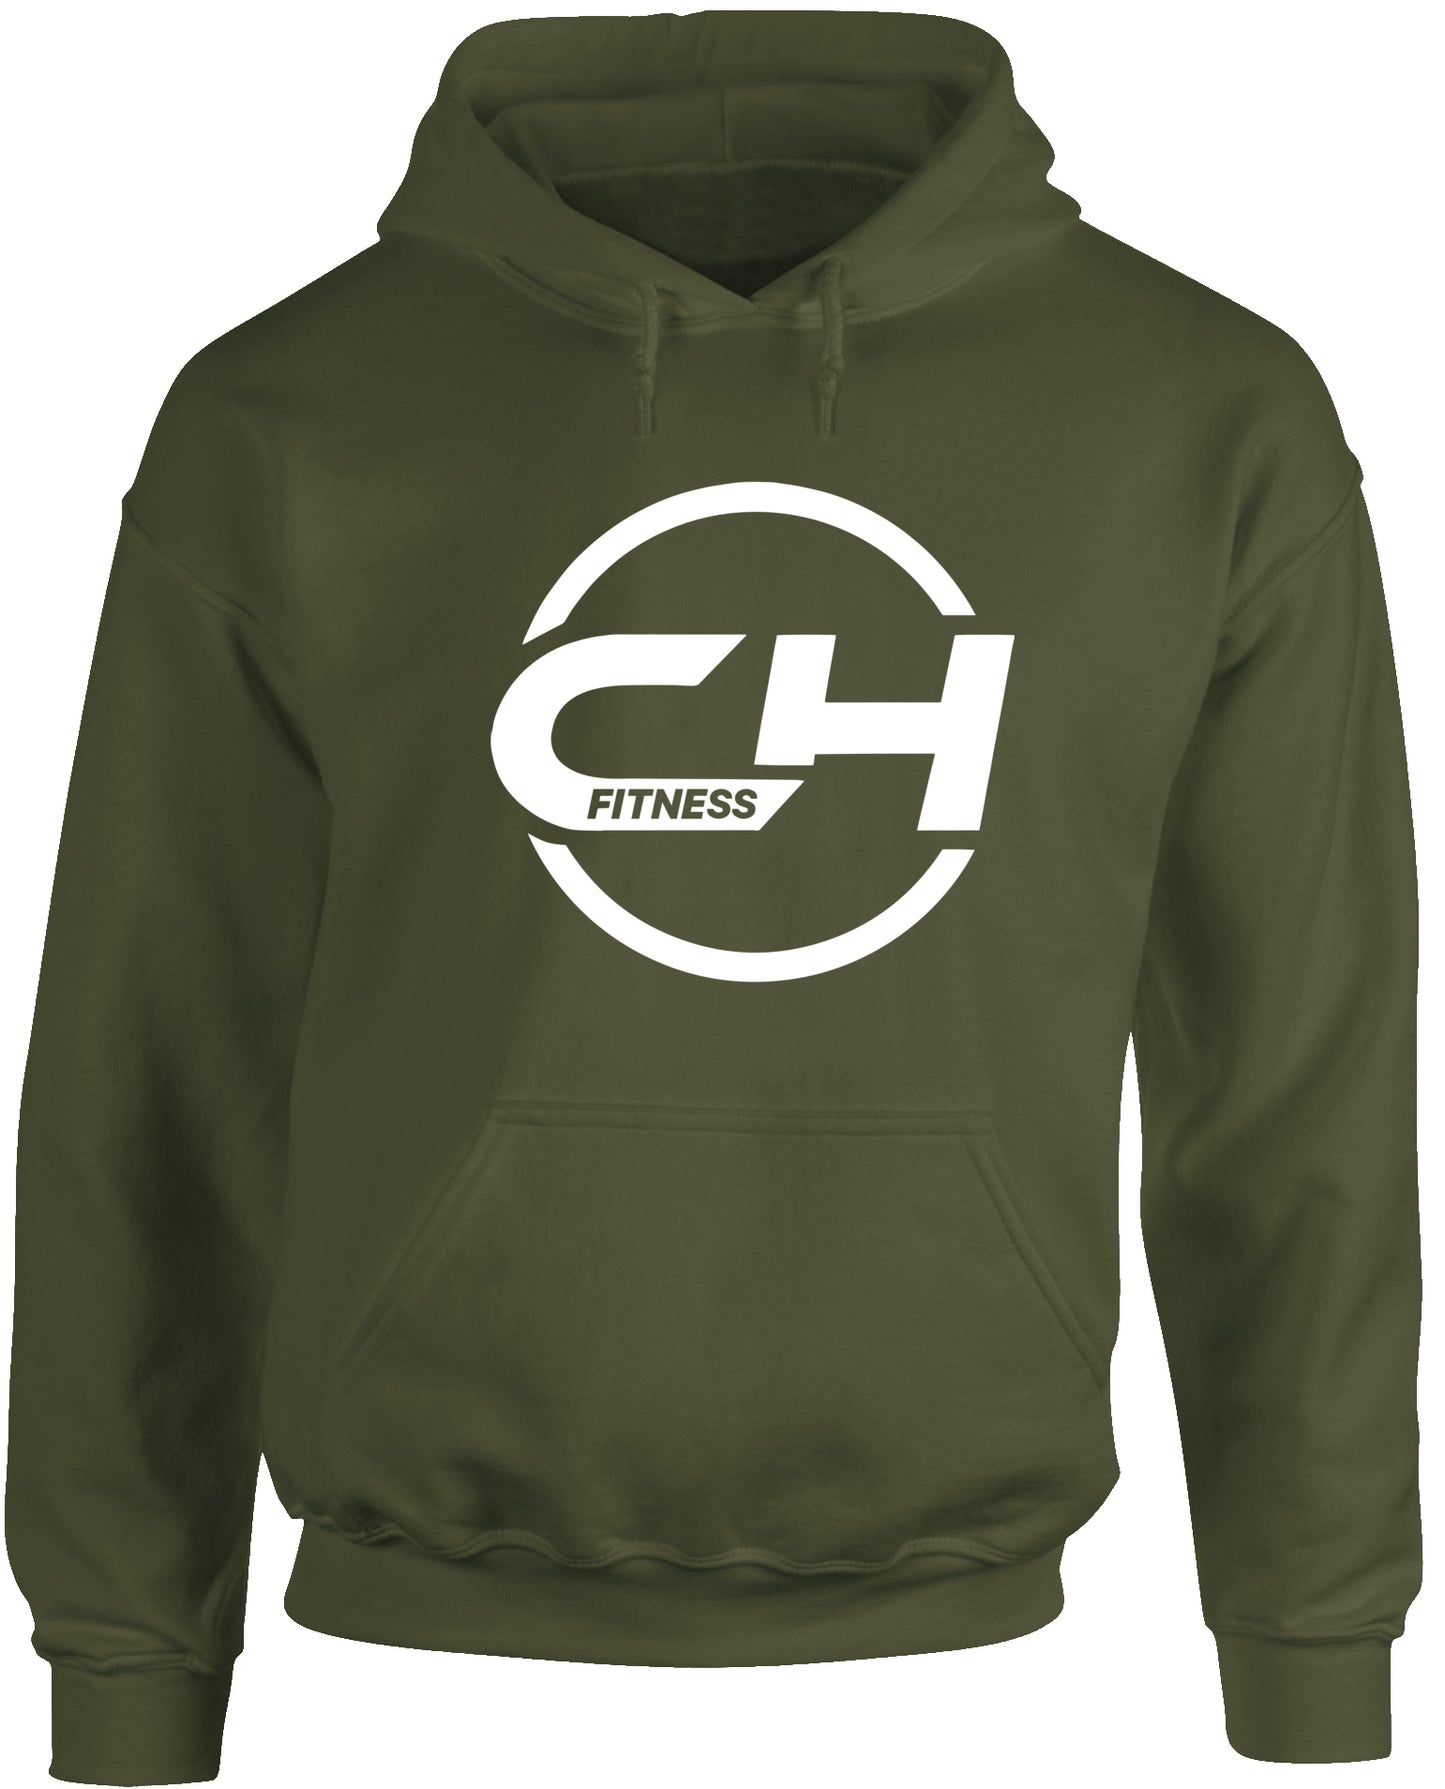 CH Fitness Adults Hoodie